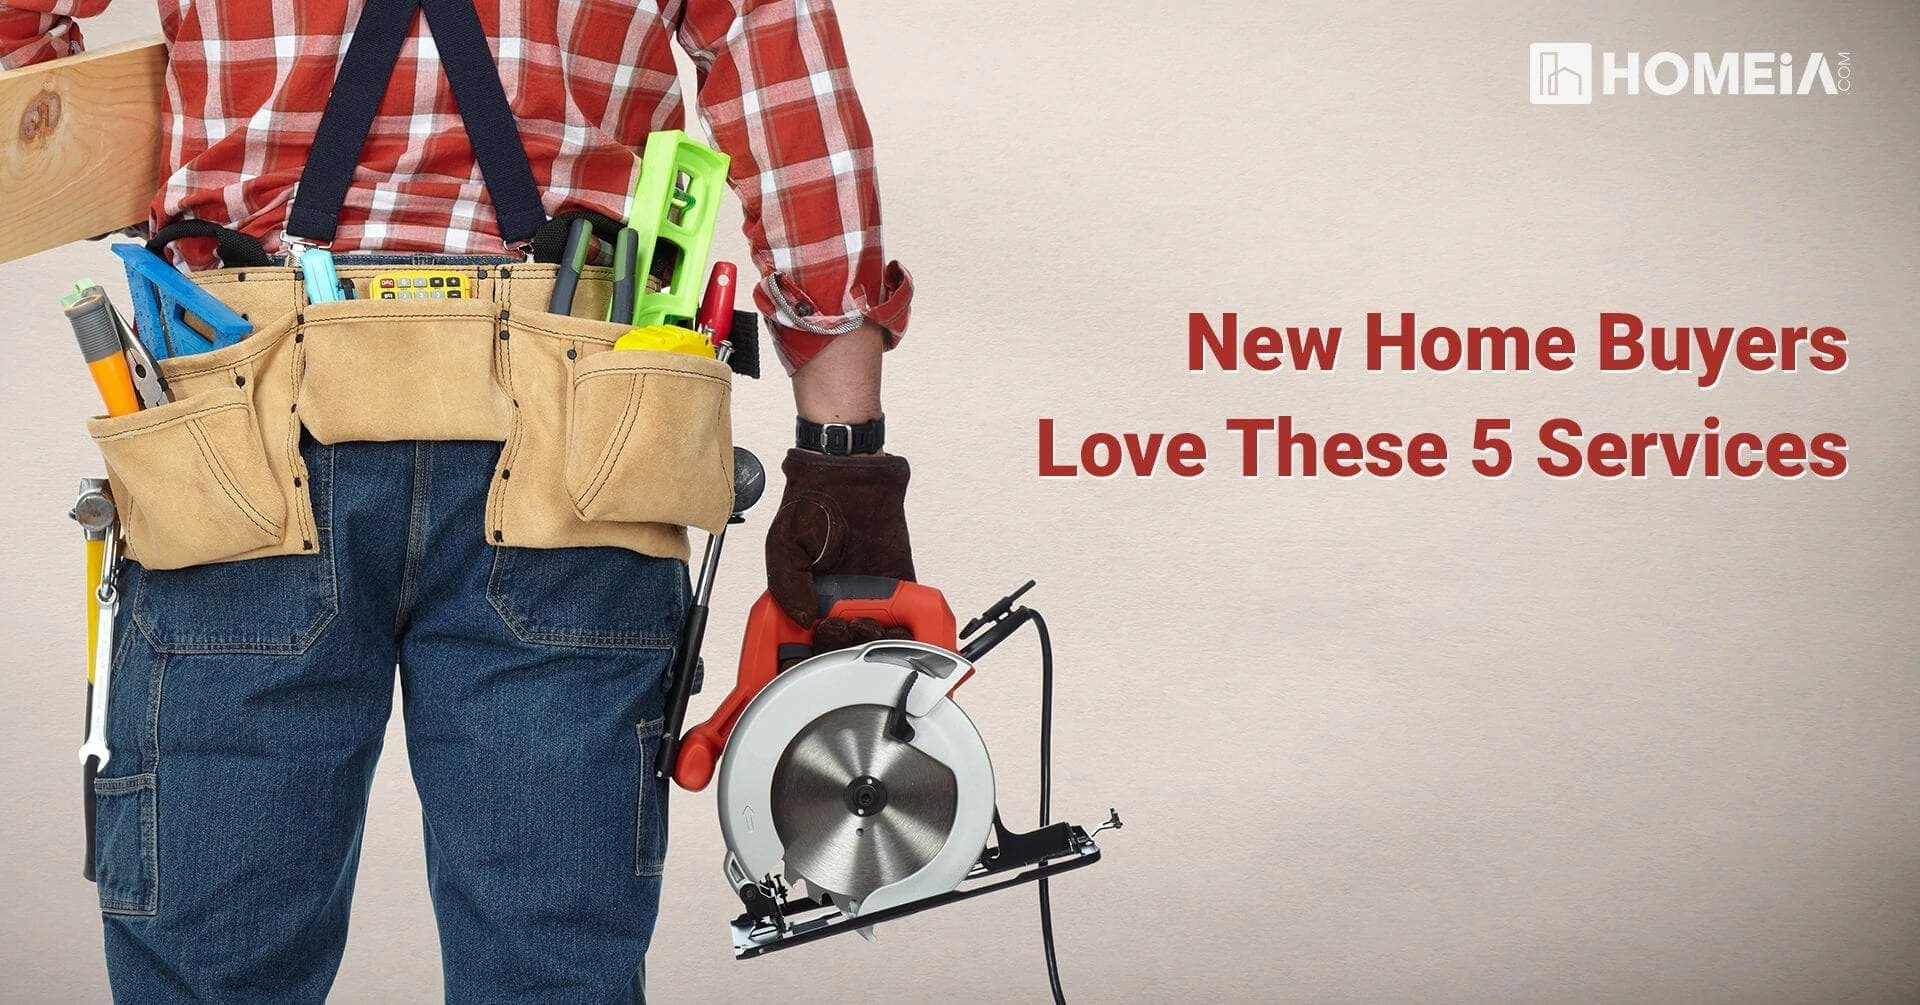 New Home Buyers Love These 5 Services